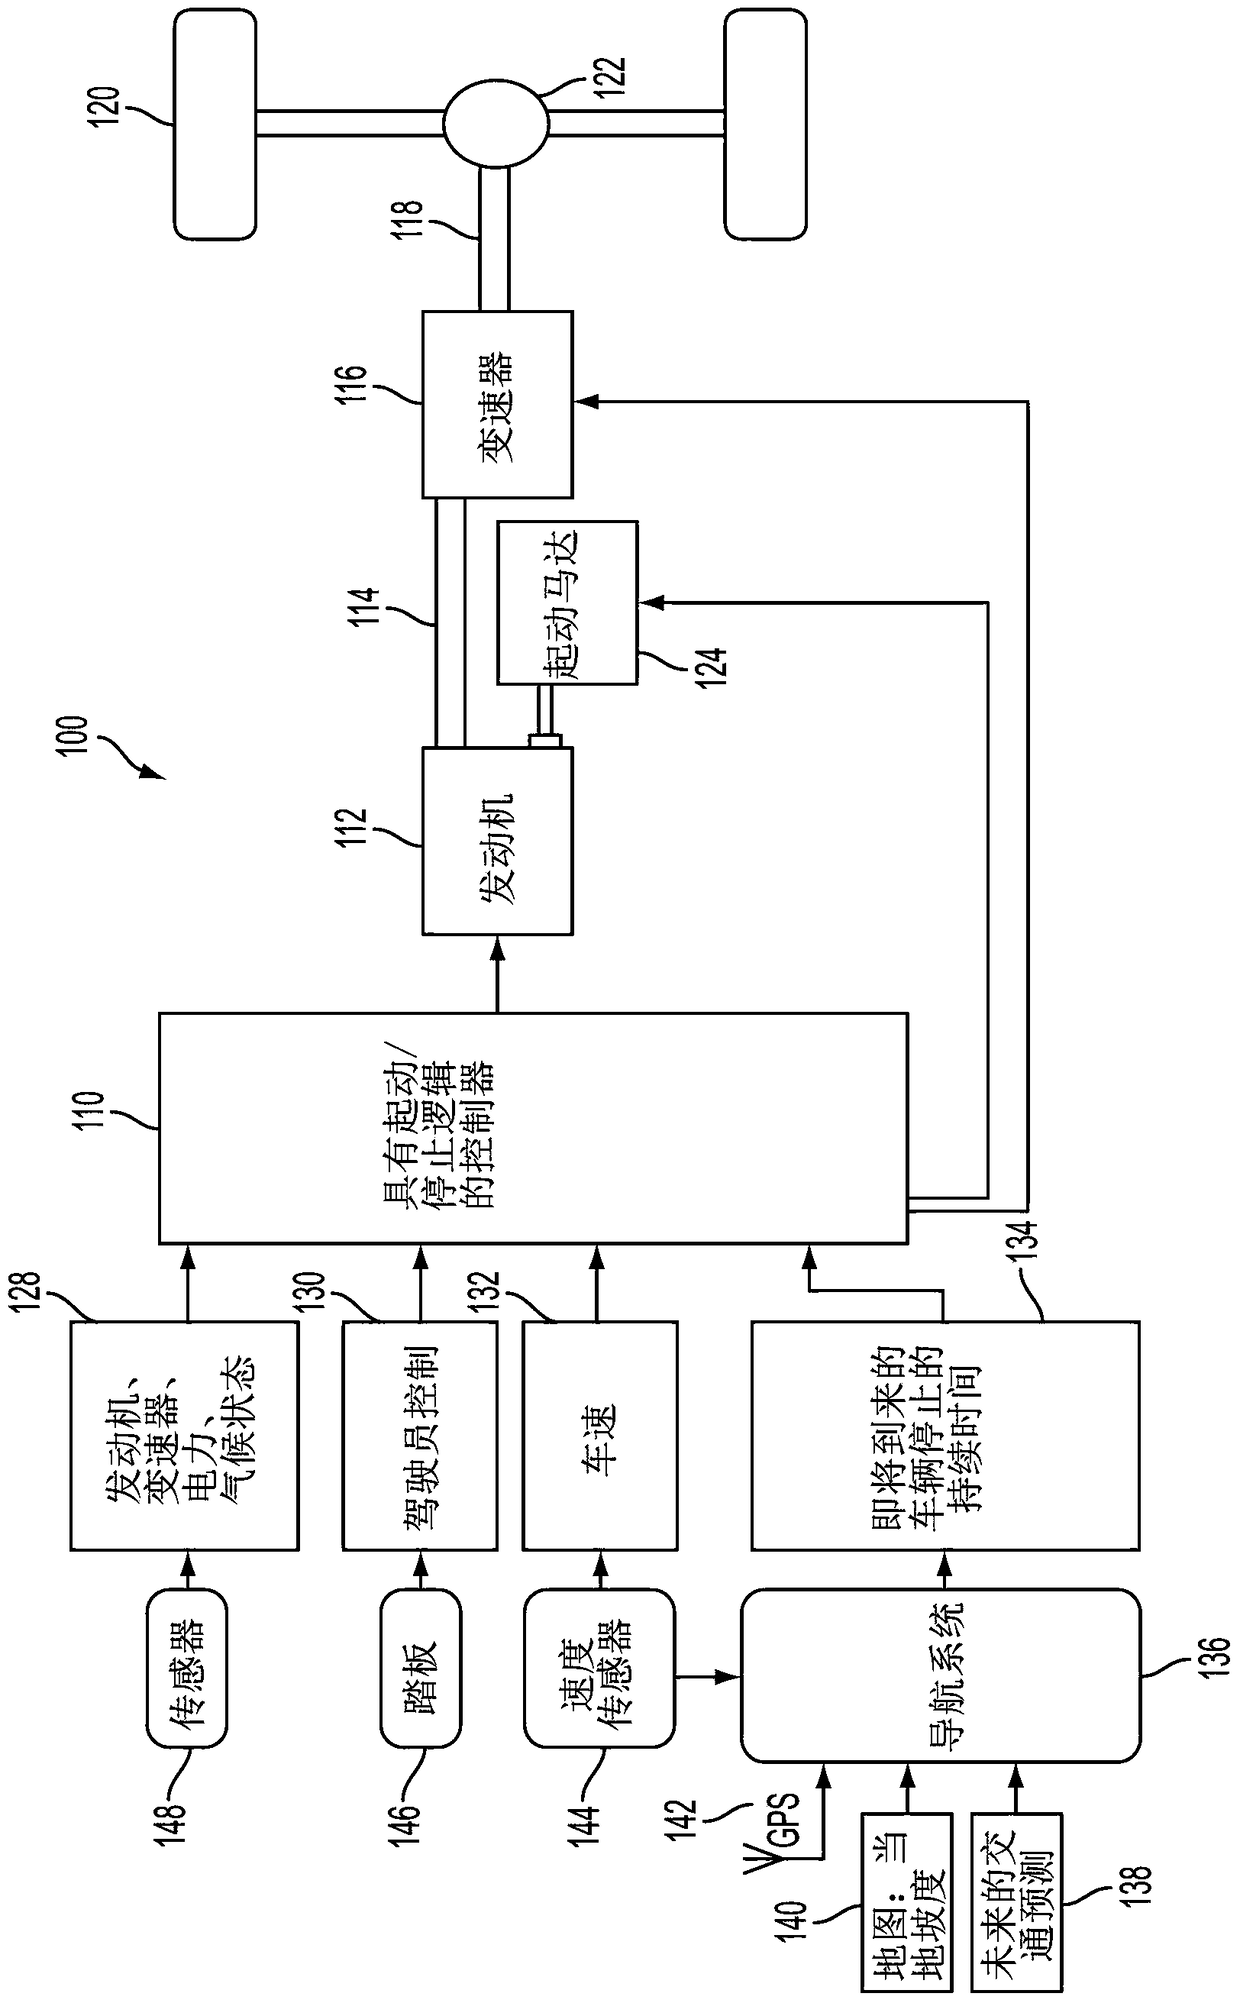 Engine idling stop control system and method with starter motor protection